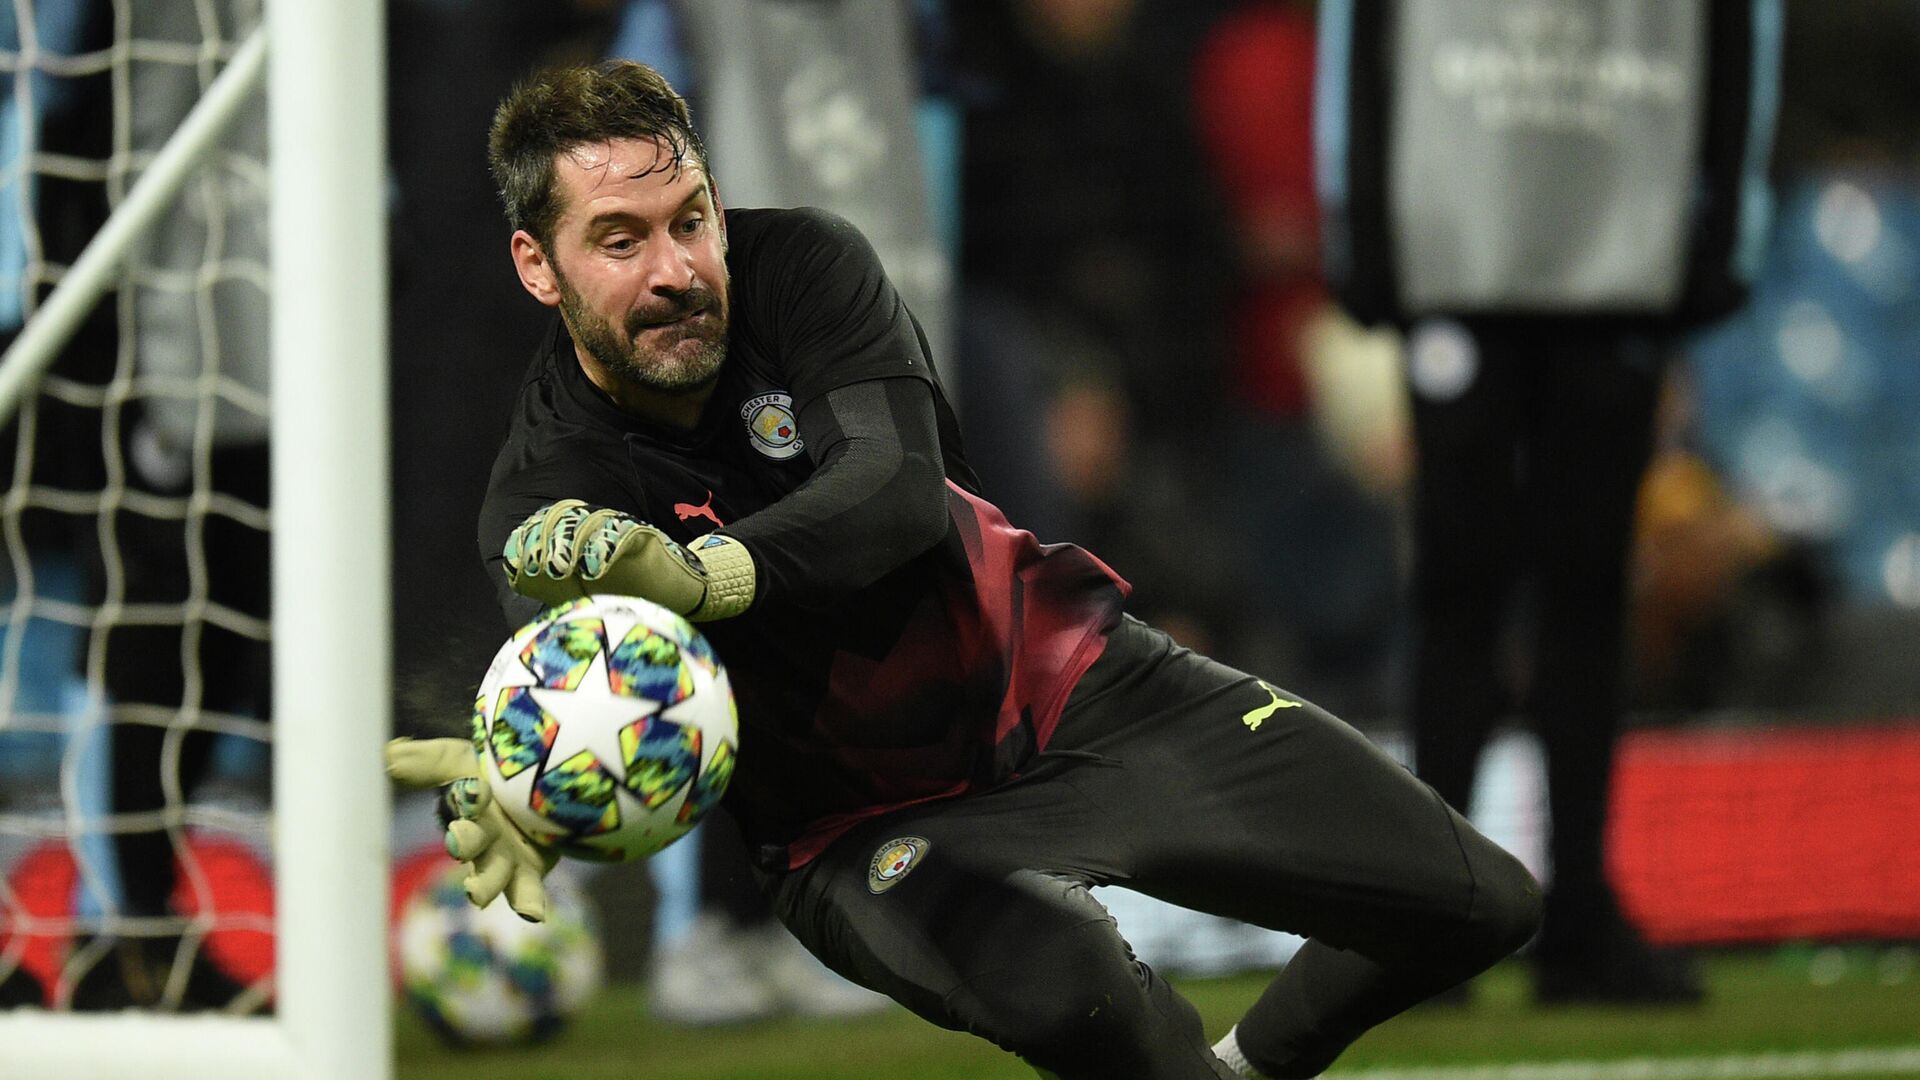 Manchester City's English goalkeeper Scott Carson warms up ahead of the UEFA Champions League football Group C match between Manchester City and Shakhtar Donetsk at the Etihad Stadium in Manchester, north west England on November 26, 2019. (Photo by Oli SCARFF / AFP) - РИА Новости, 1920, 06.01.2021